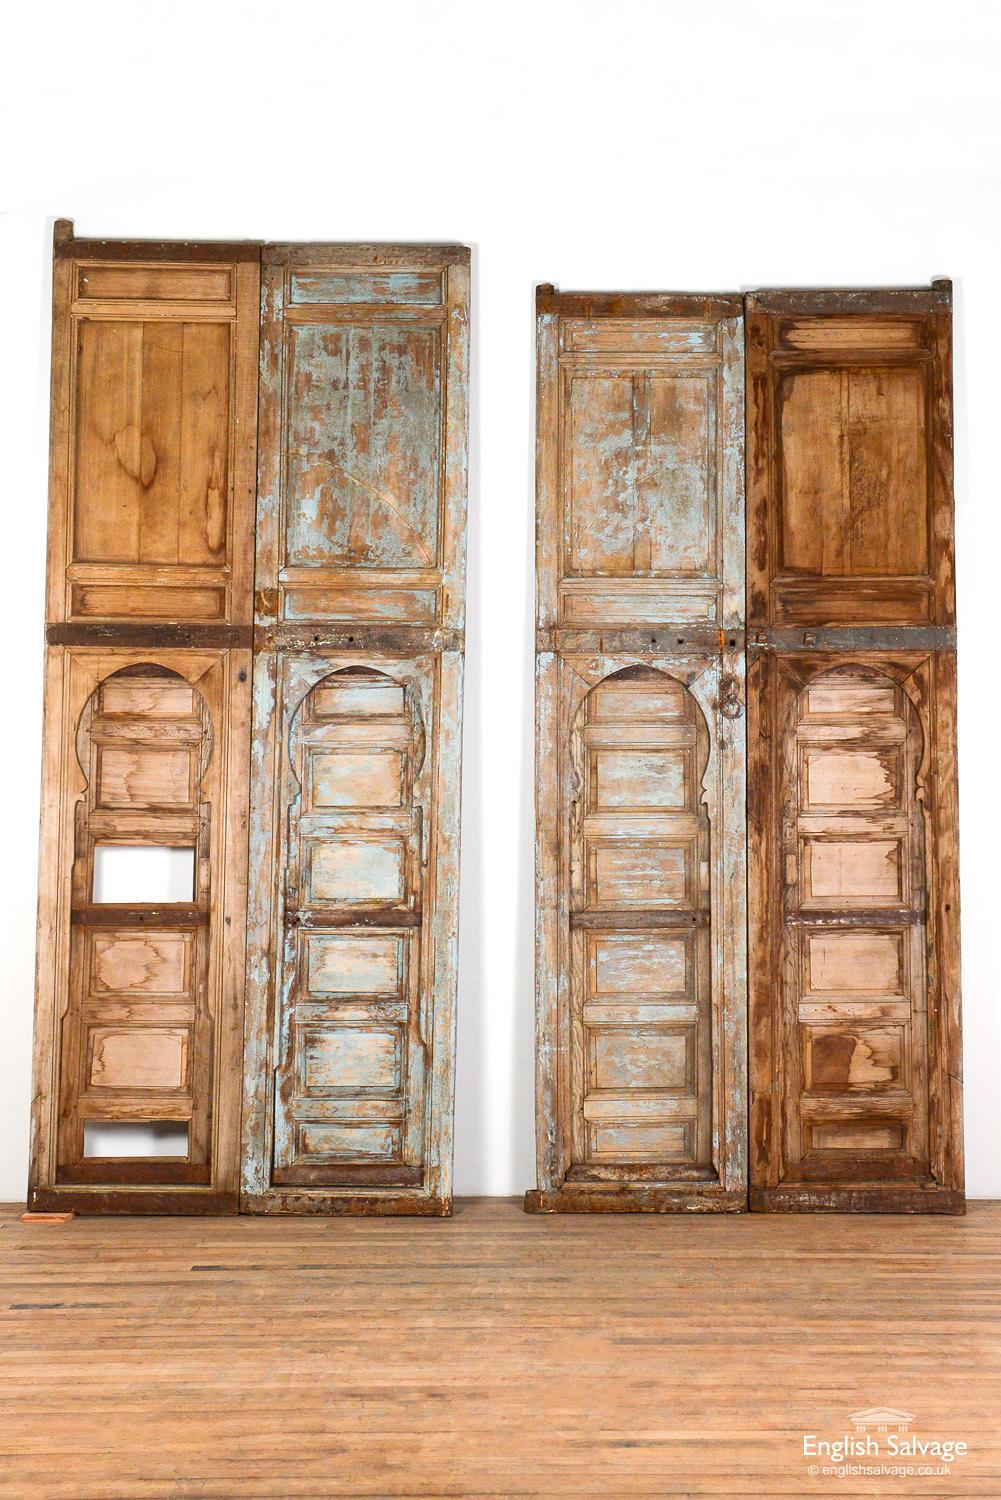 Imposing antique pine double doors, with Judas gates, reclaimed from Marrakech. Size of the larger double doors stated below (B1801), the Judas gate opening is 48cm wide x 179.5cm high. The shorter double doors (B1802) are 147cm wide x 320cm high x